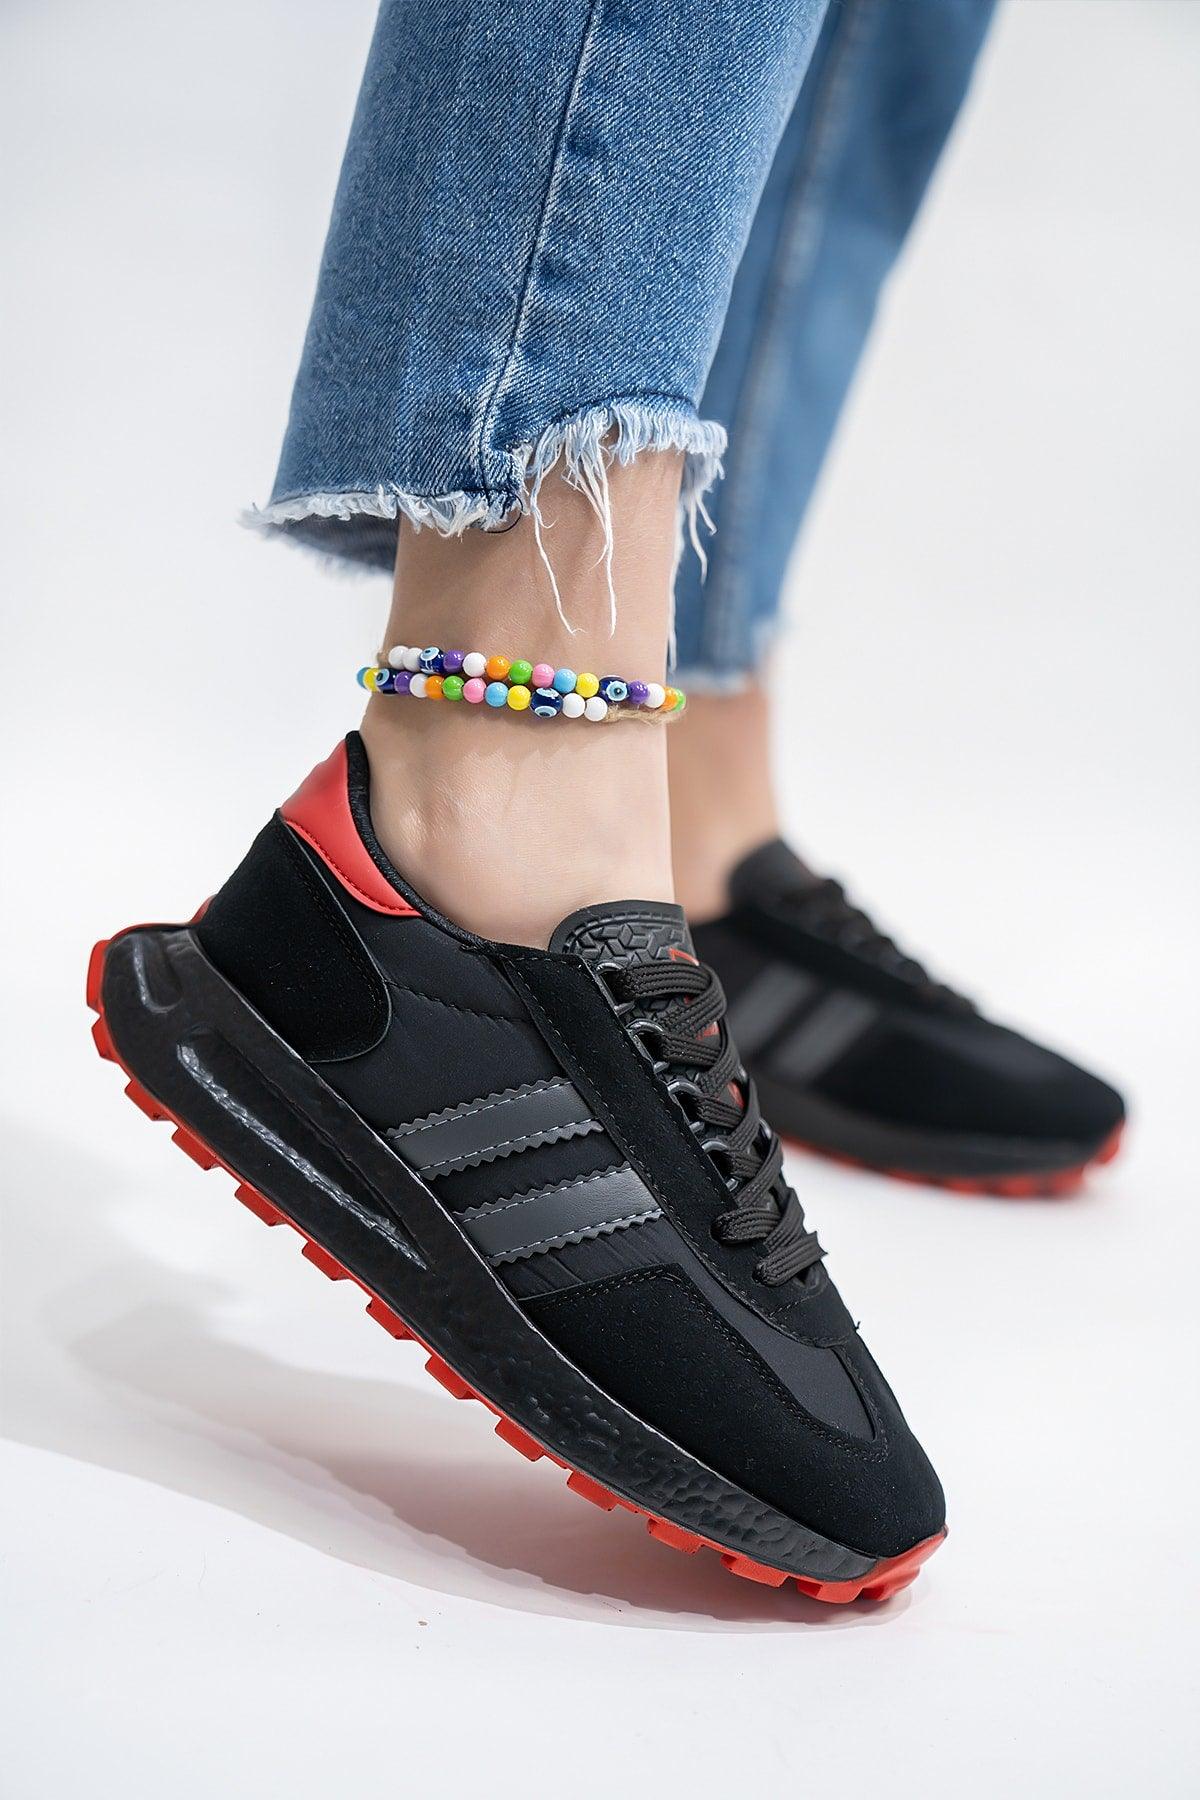 Unisex Casual Casual Sports Shoes Sneaker - Swordslife